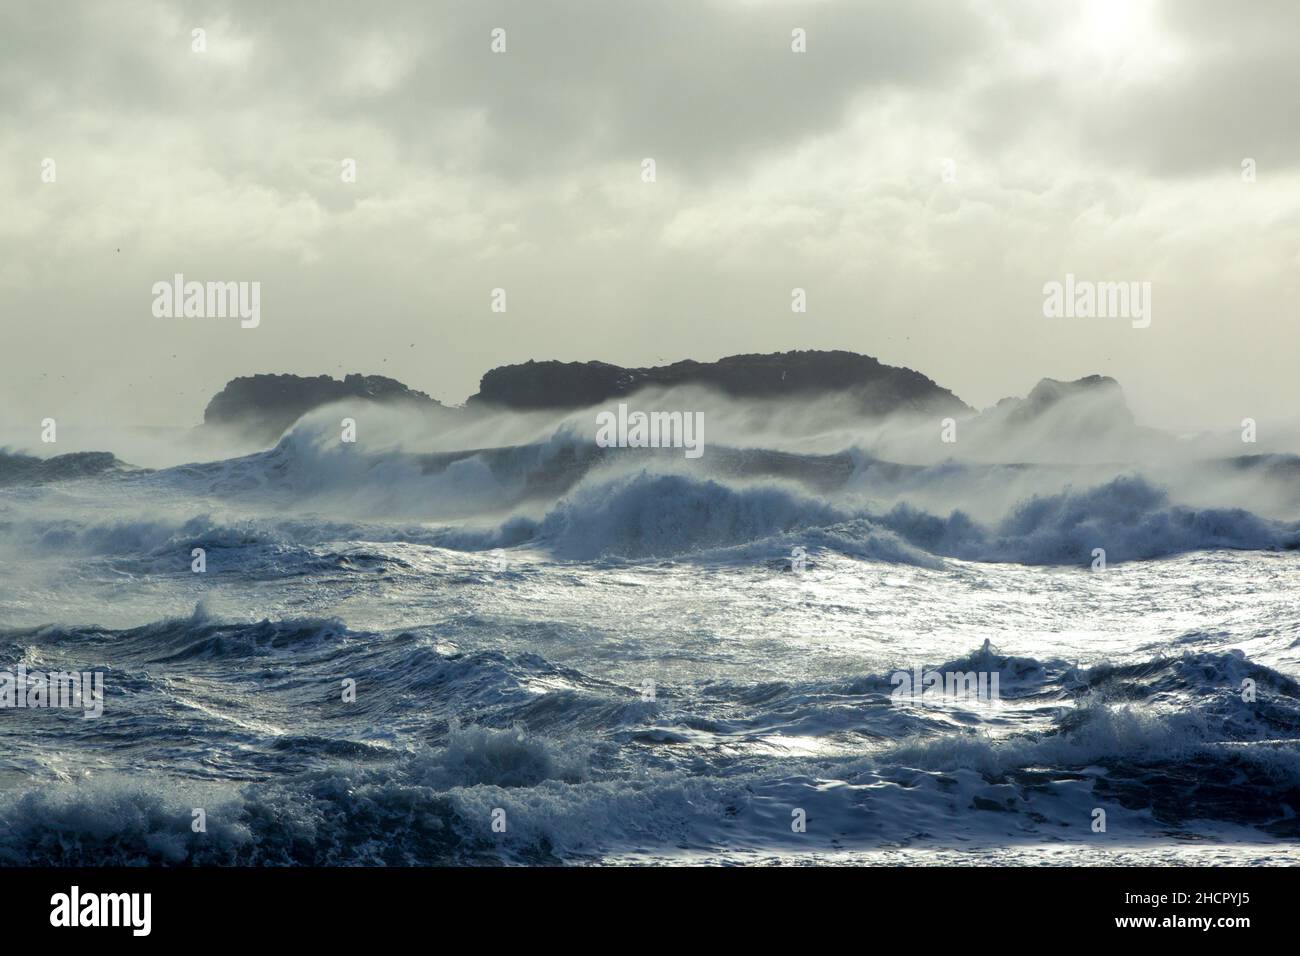 High energy waves crash ashore during stormy conditions in Iceland Stock Photo